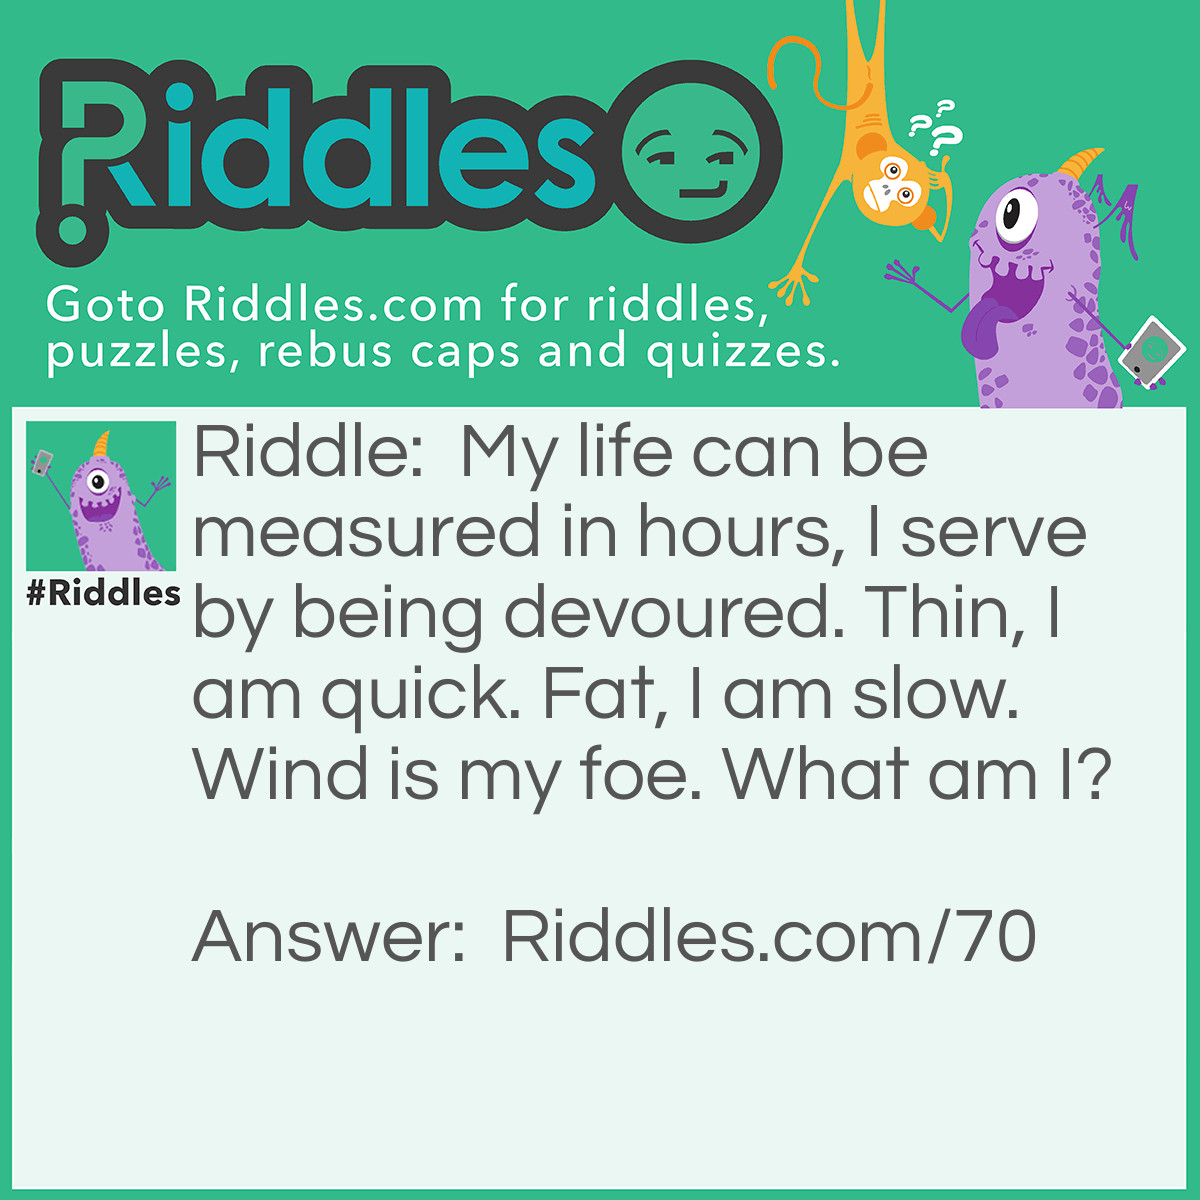 Riddle: My life can be measured in hours, I serve by being devoured. Thin, I am quick. Fat, I am slow. Wind is my foe. What am I? Answer: I am a candle.